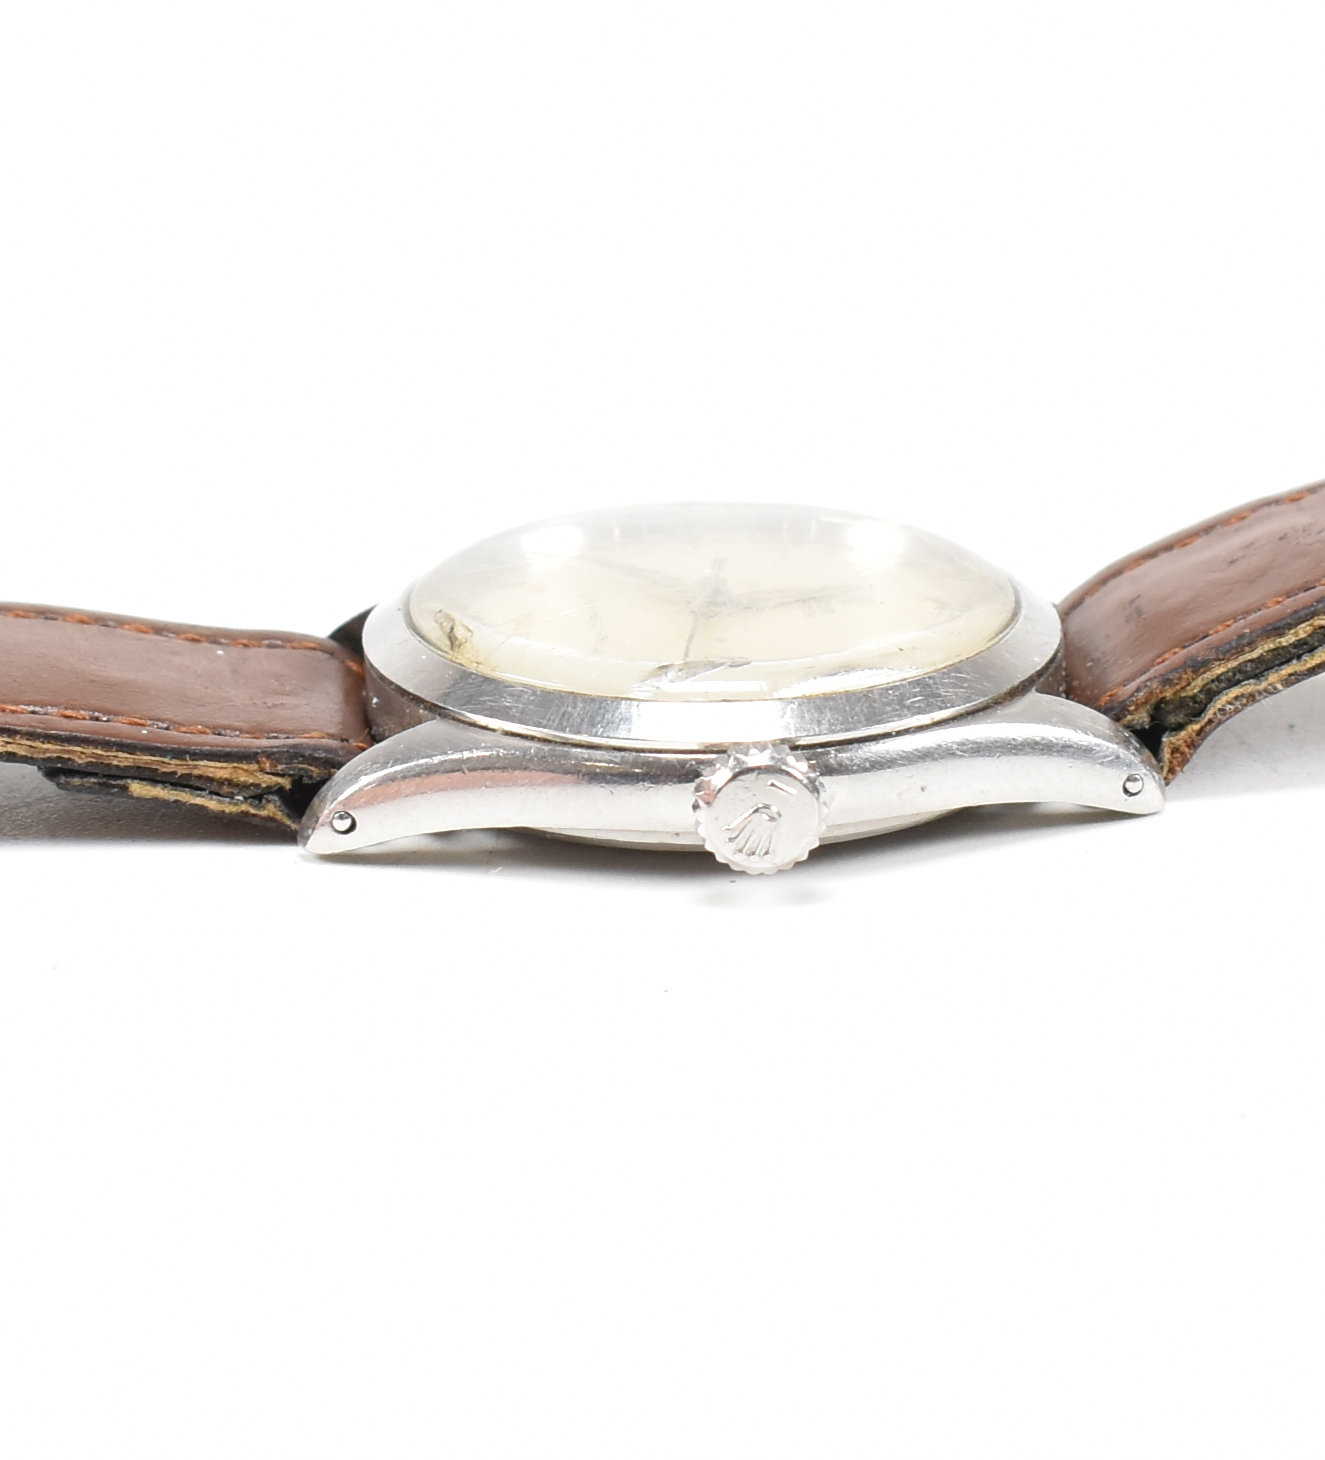 MID CENTURY TUDOR OYSTER STAINLESS STEEL WRISTWATCH - Image 4 of 7